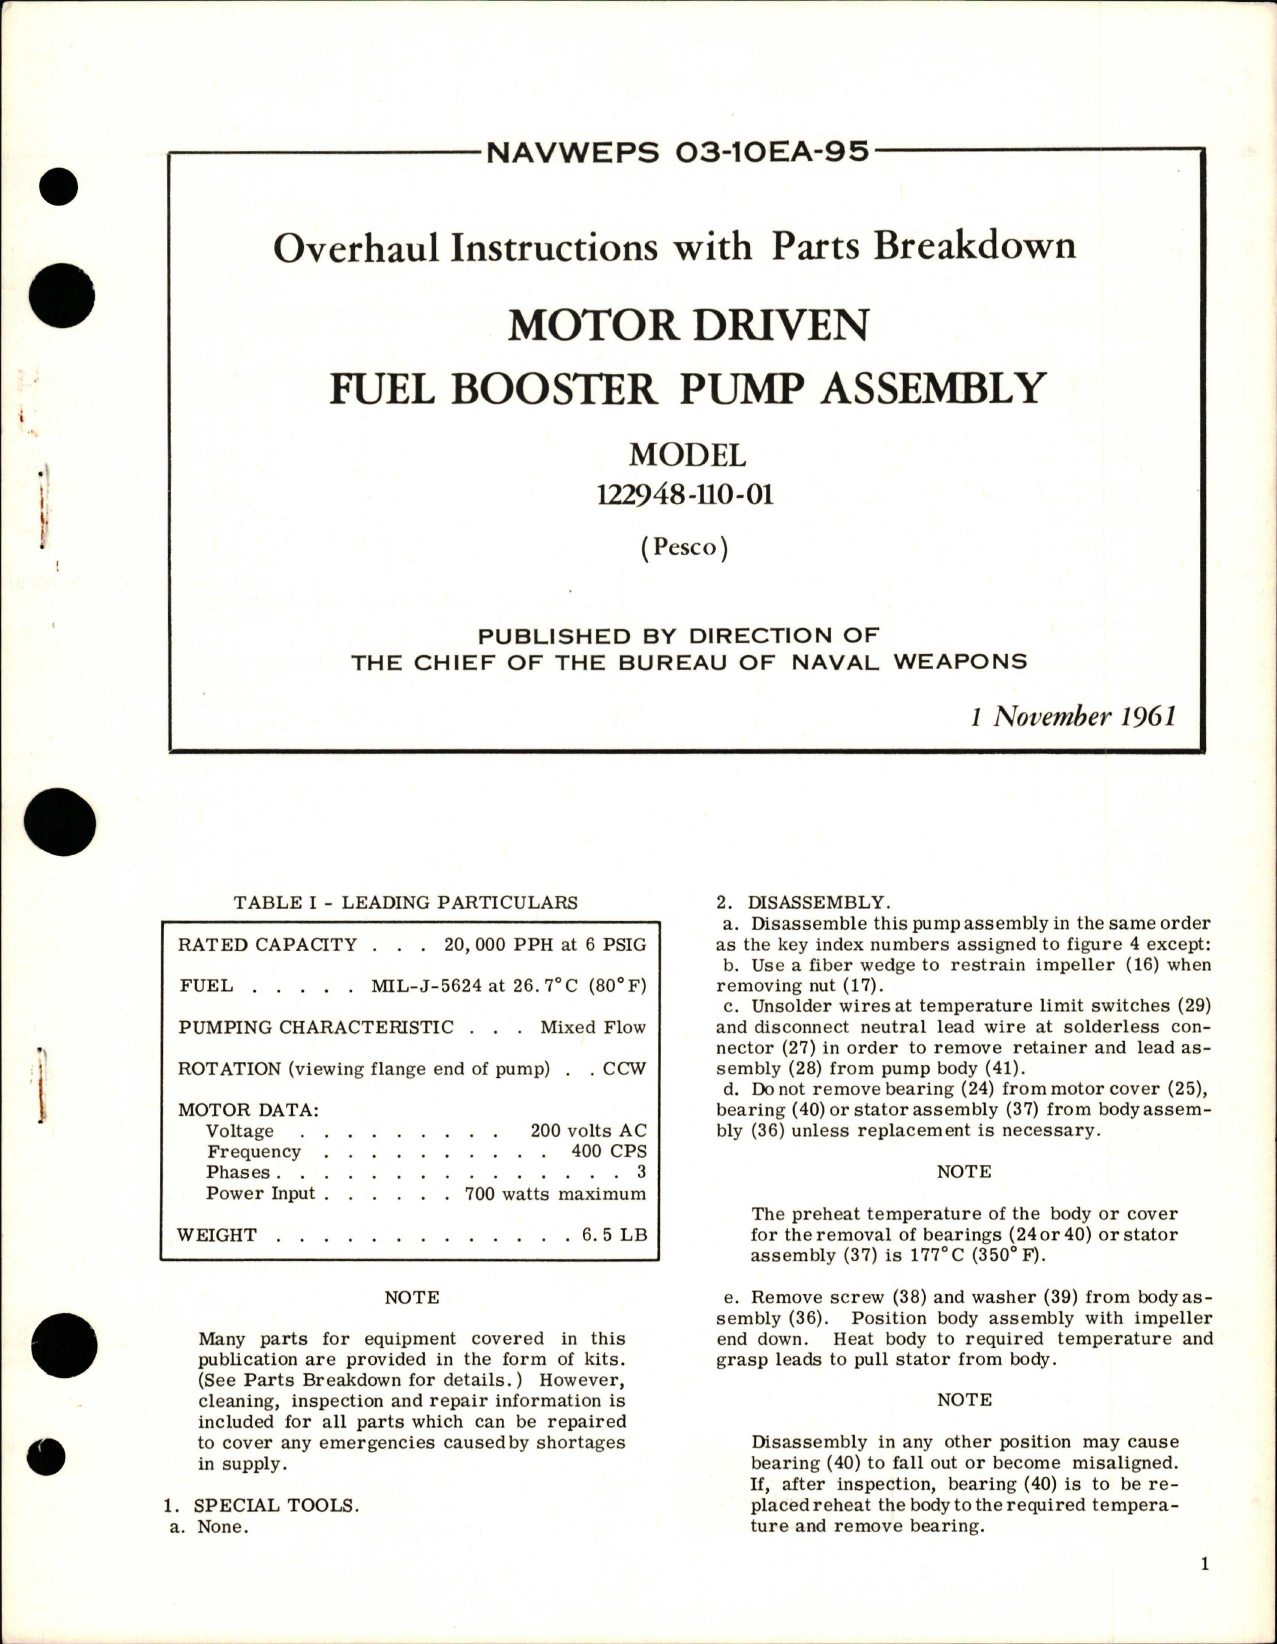 Sample page 1 from AirCorps Library document: Overhaul Instructions with Parts for Motor Driven Fuel Booster Pump Assembly - Model 122948-110-01 